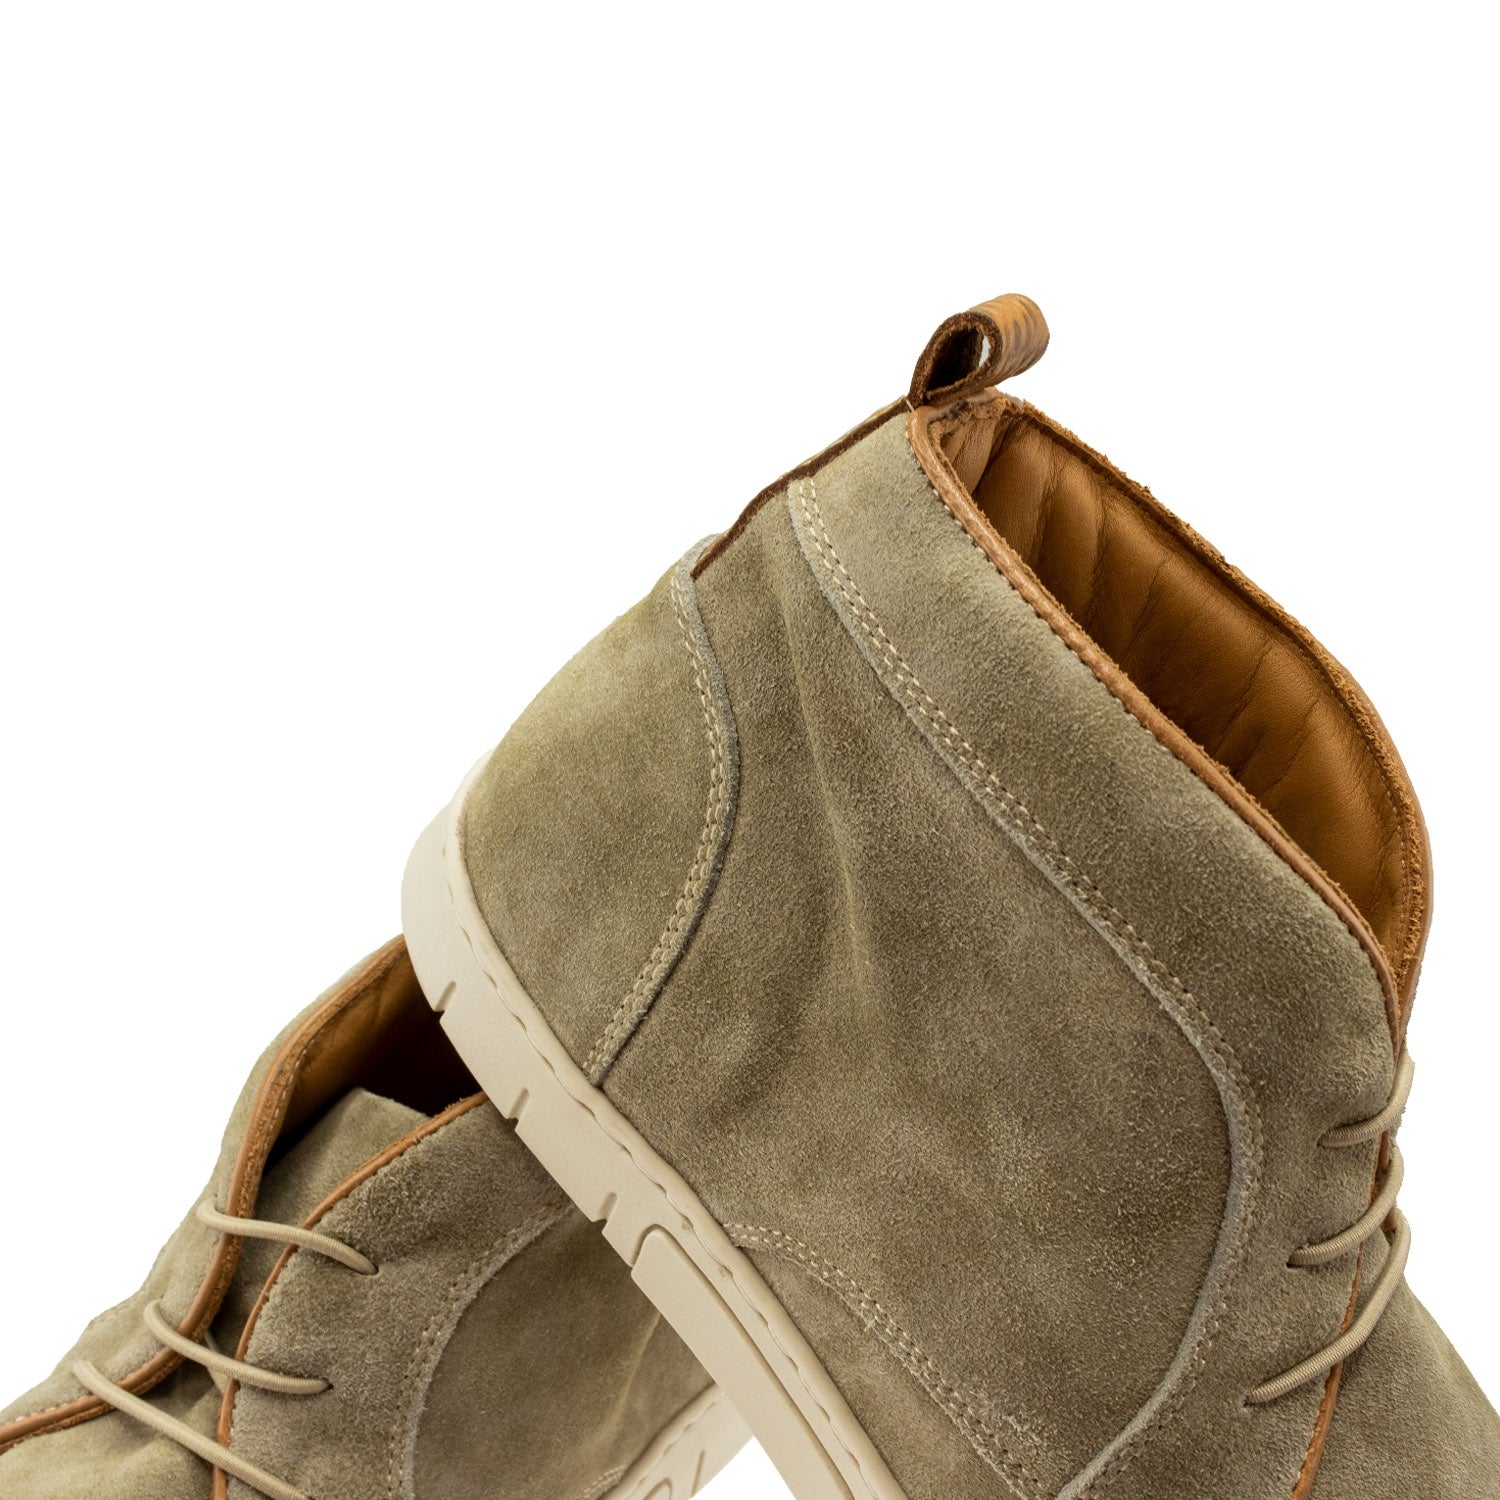 Scottsdale Suede Chukka Boot in Grey by T.B. Phelps